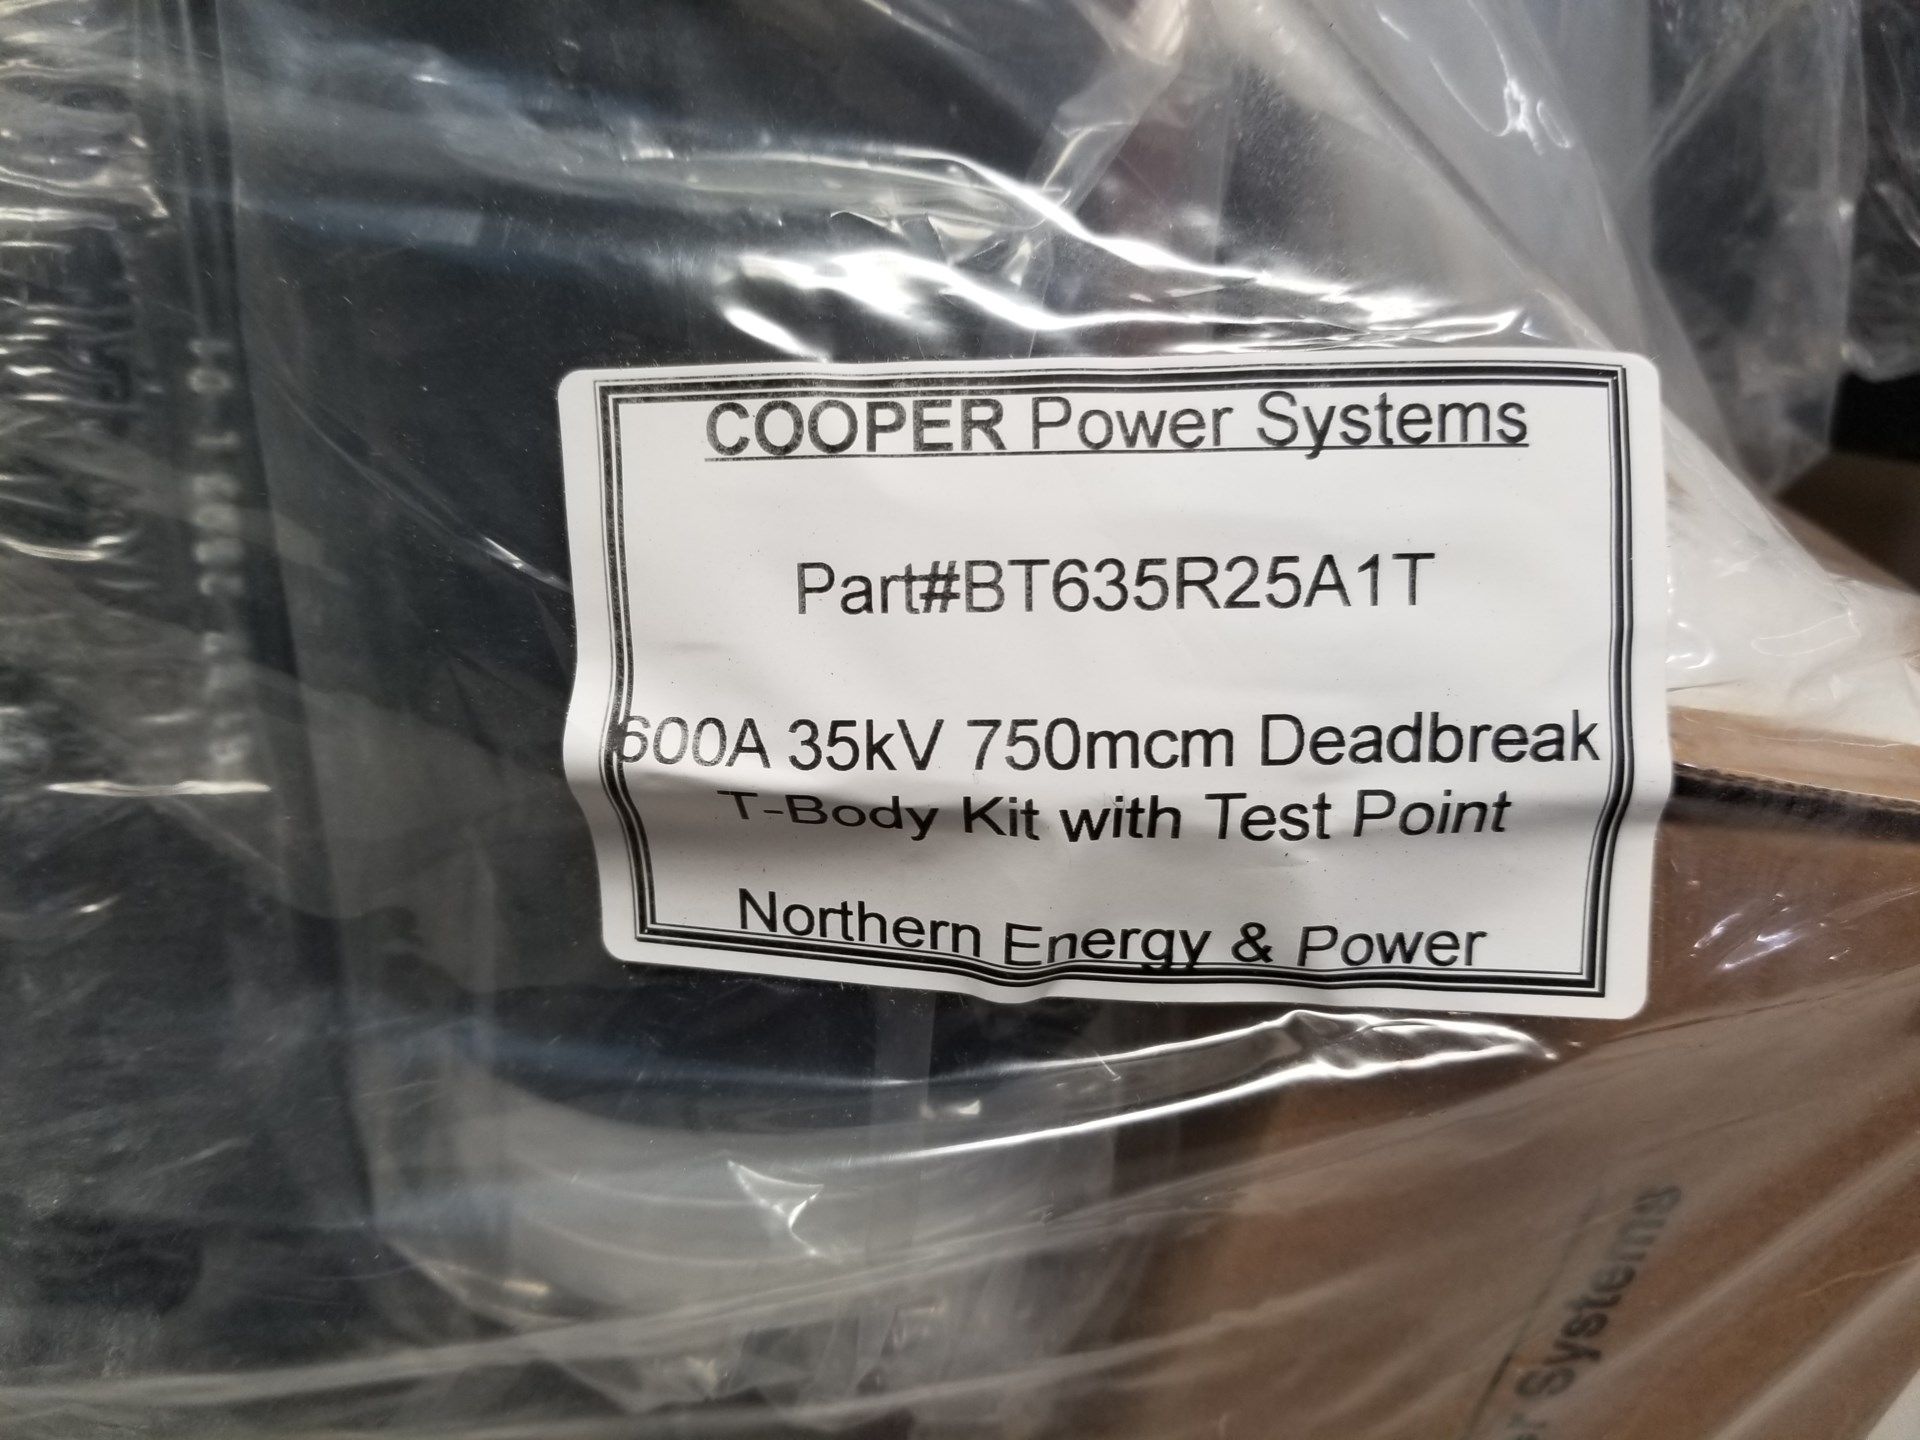 NEW EATON/COOPER DEADBREAK ELECTRICAL T-BODY KIT WITH TEST POINT - Image 2 of 9